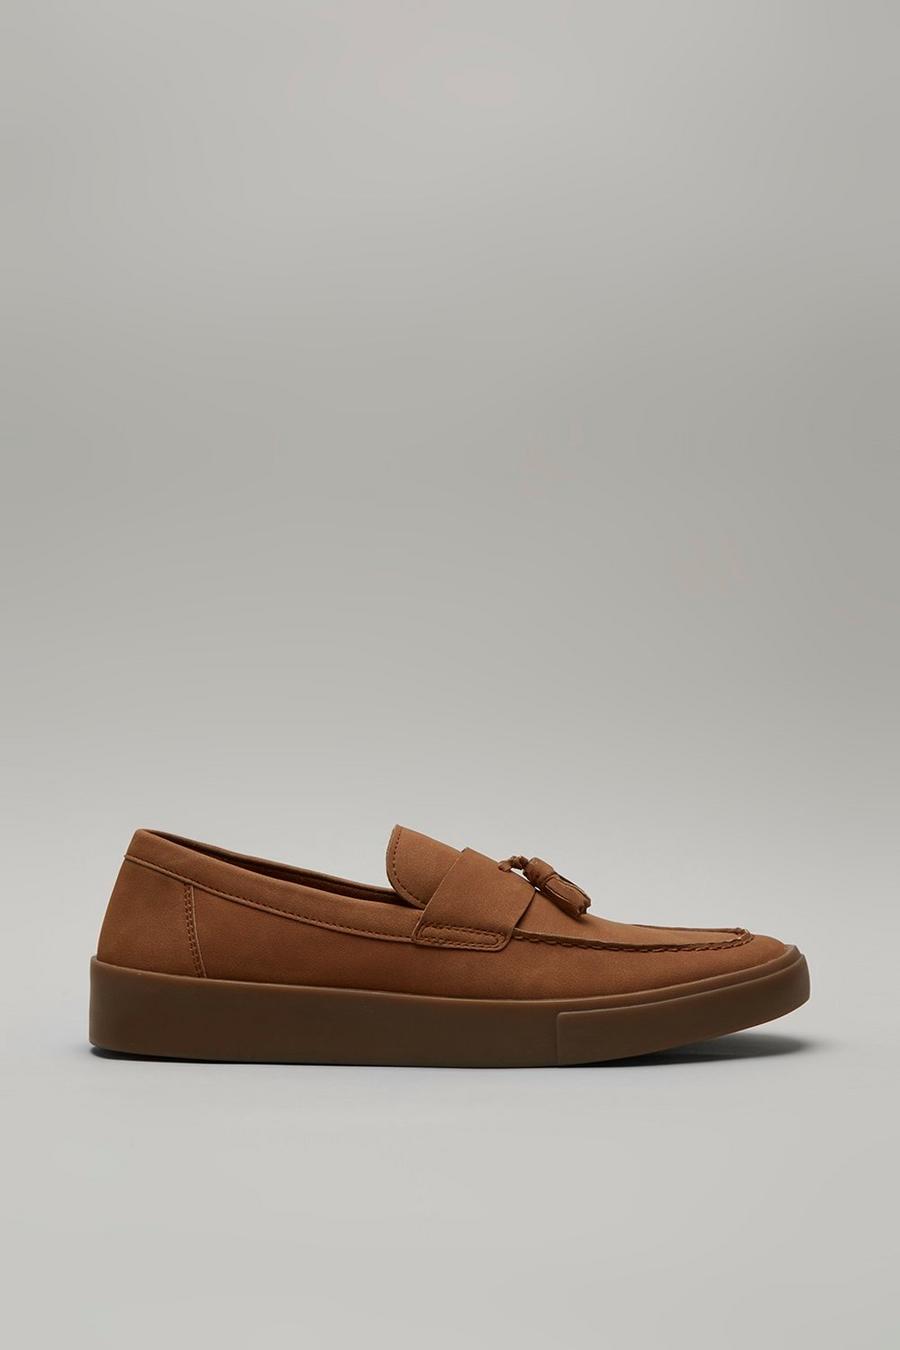 Tan Slip On Shoes With Tassel Detail